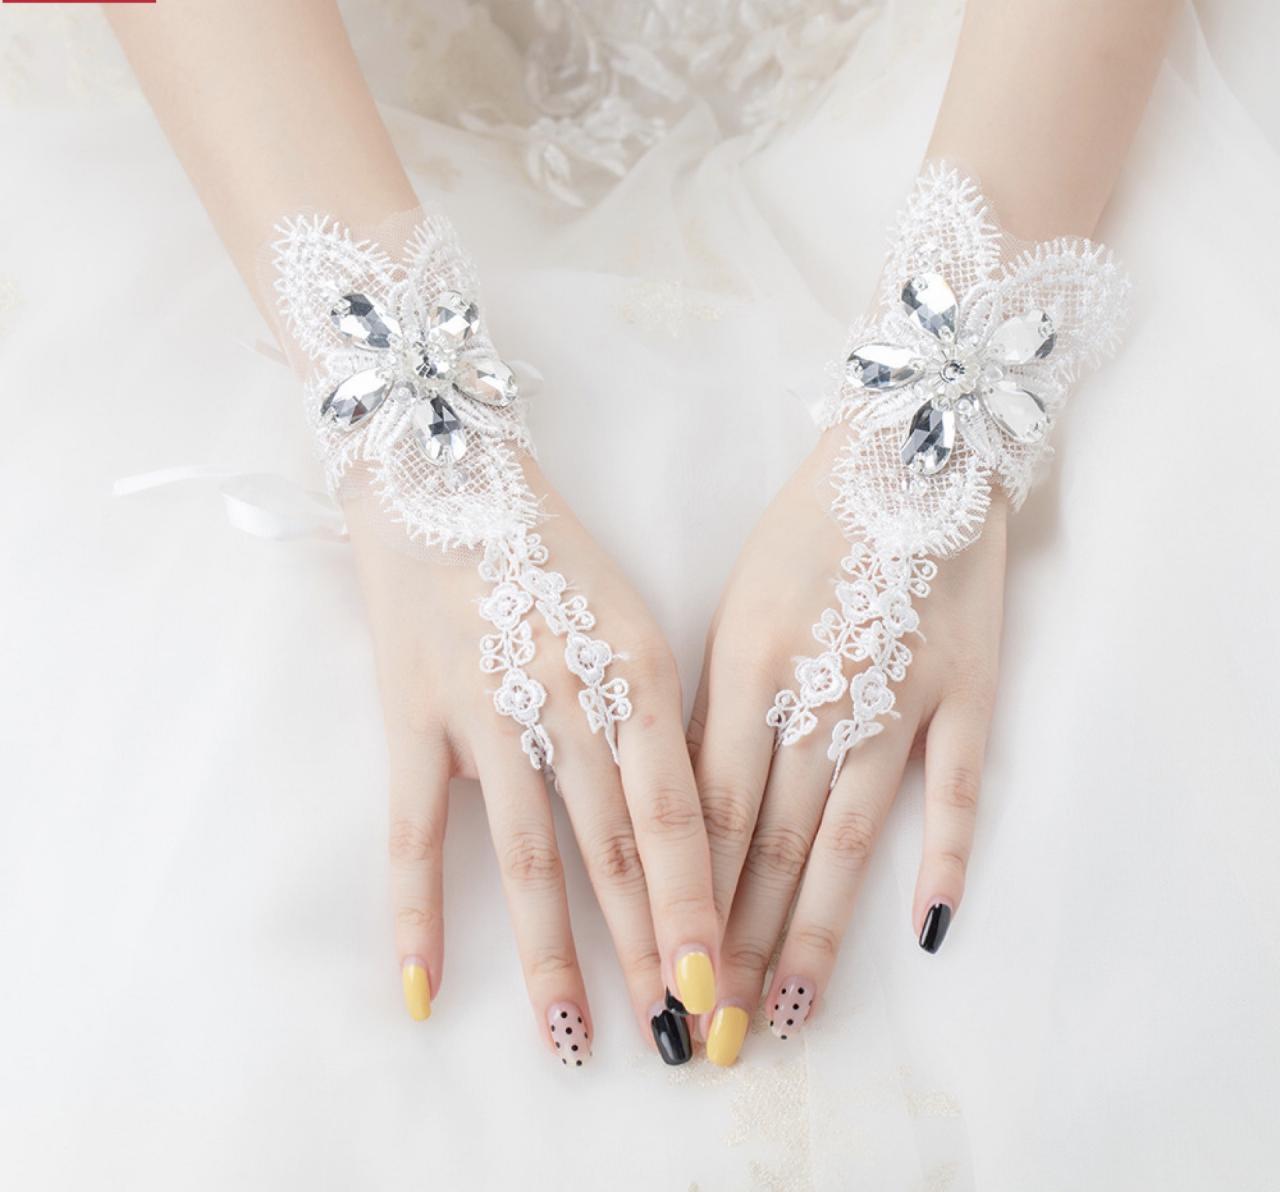 Bridal Gloves,, Stretch Wedding Lace, White Lace Accessories, Bridal Short Mesh Gloves